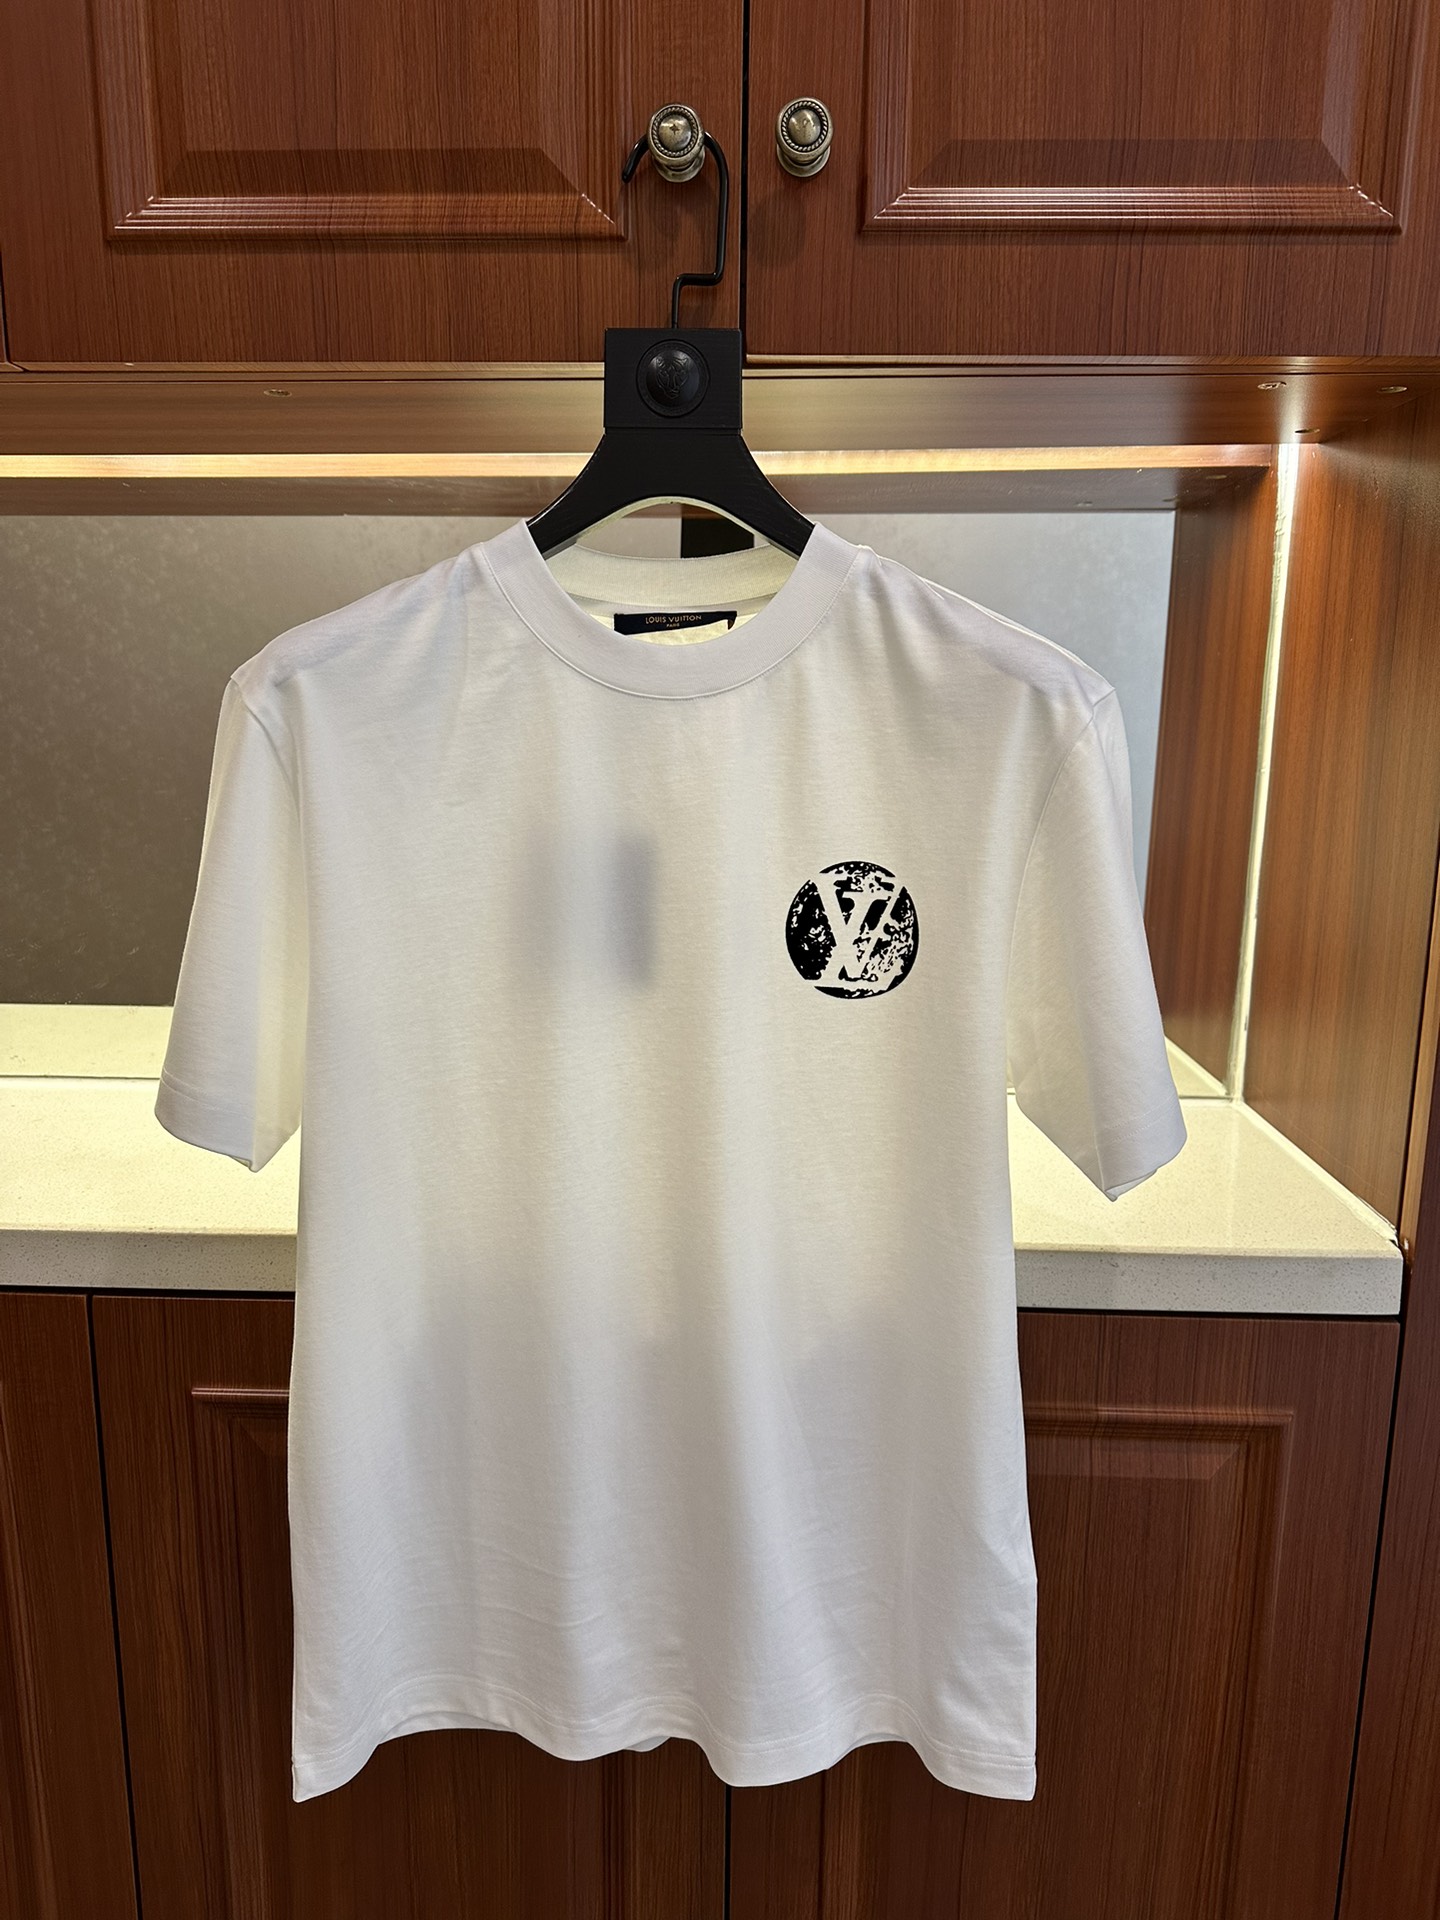 Louis Vuitton Clothing T-Shirt Black White Printing Cotton Spring/Summer Collection Fashion Short Sleeve